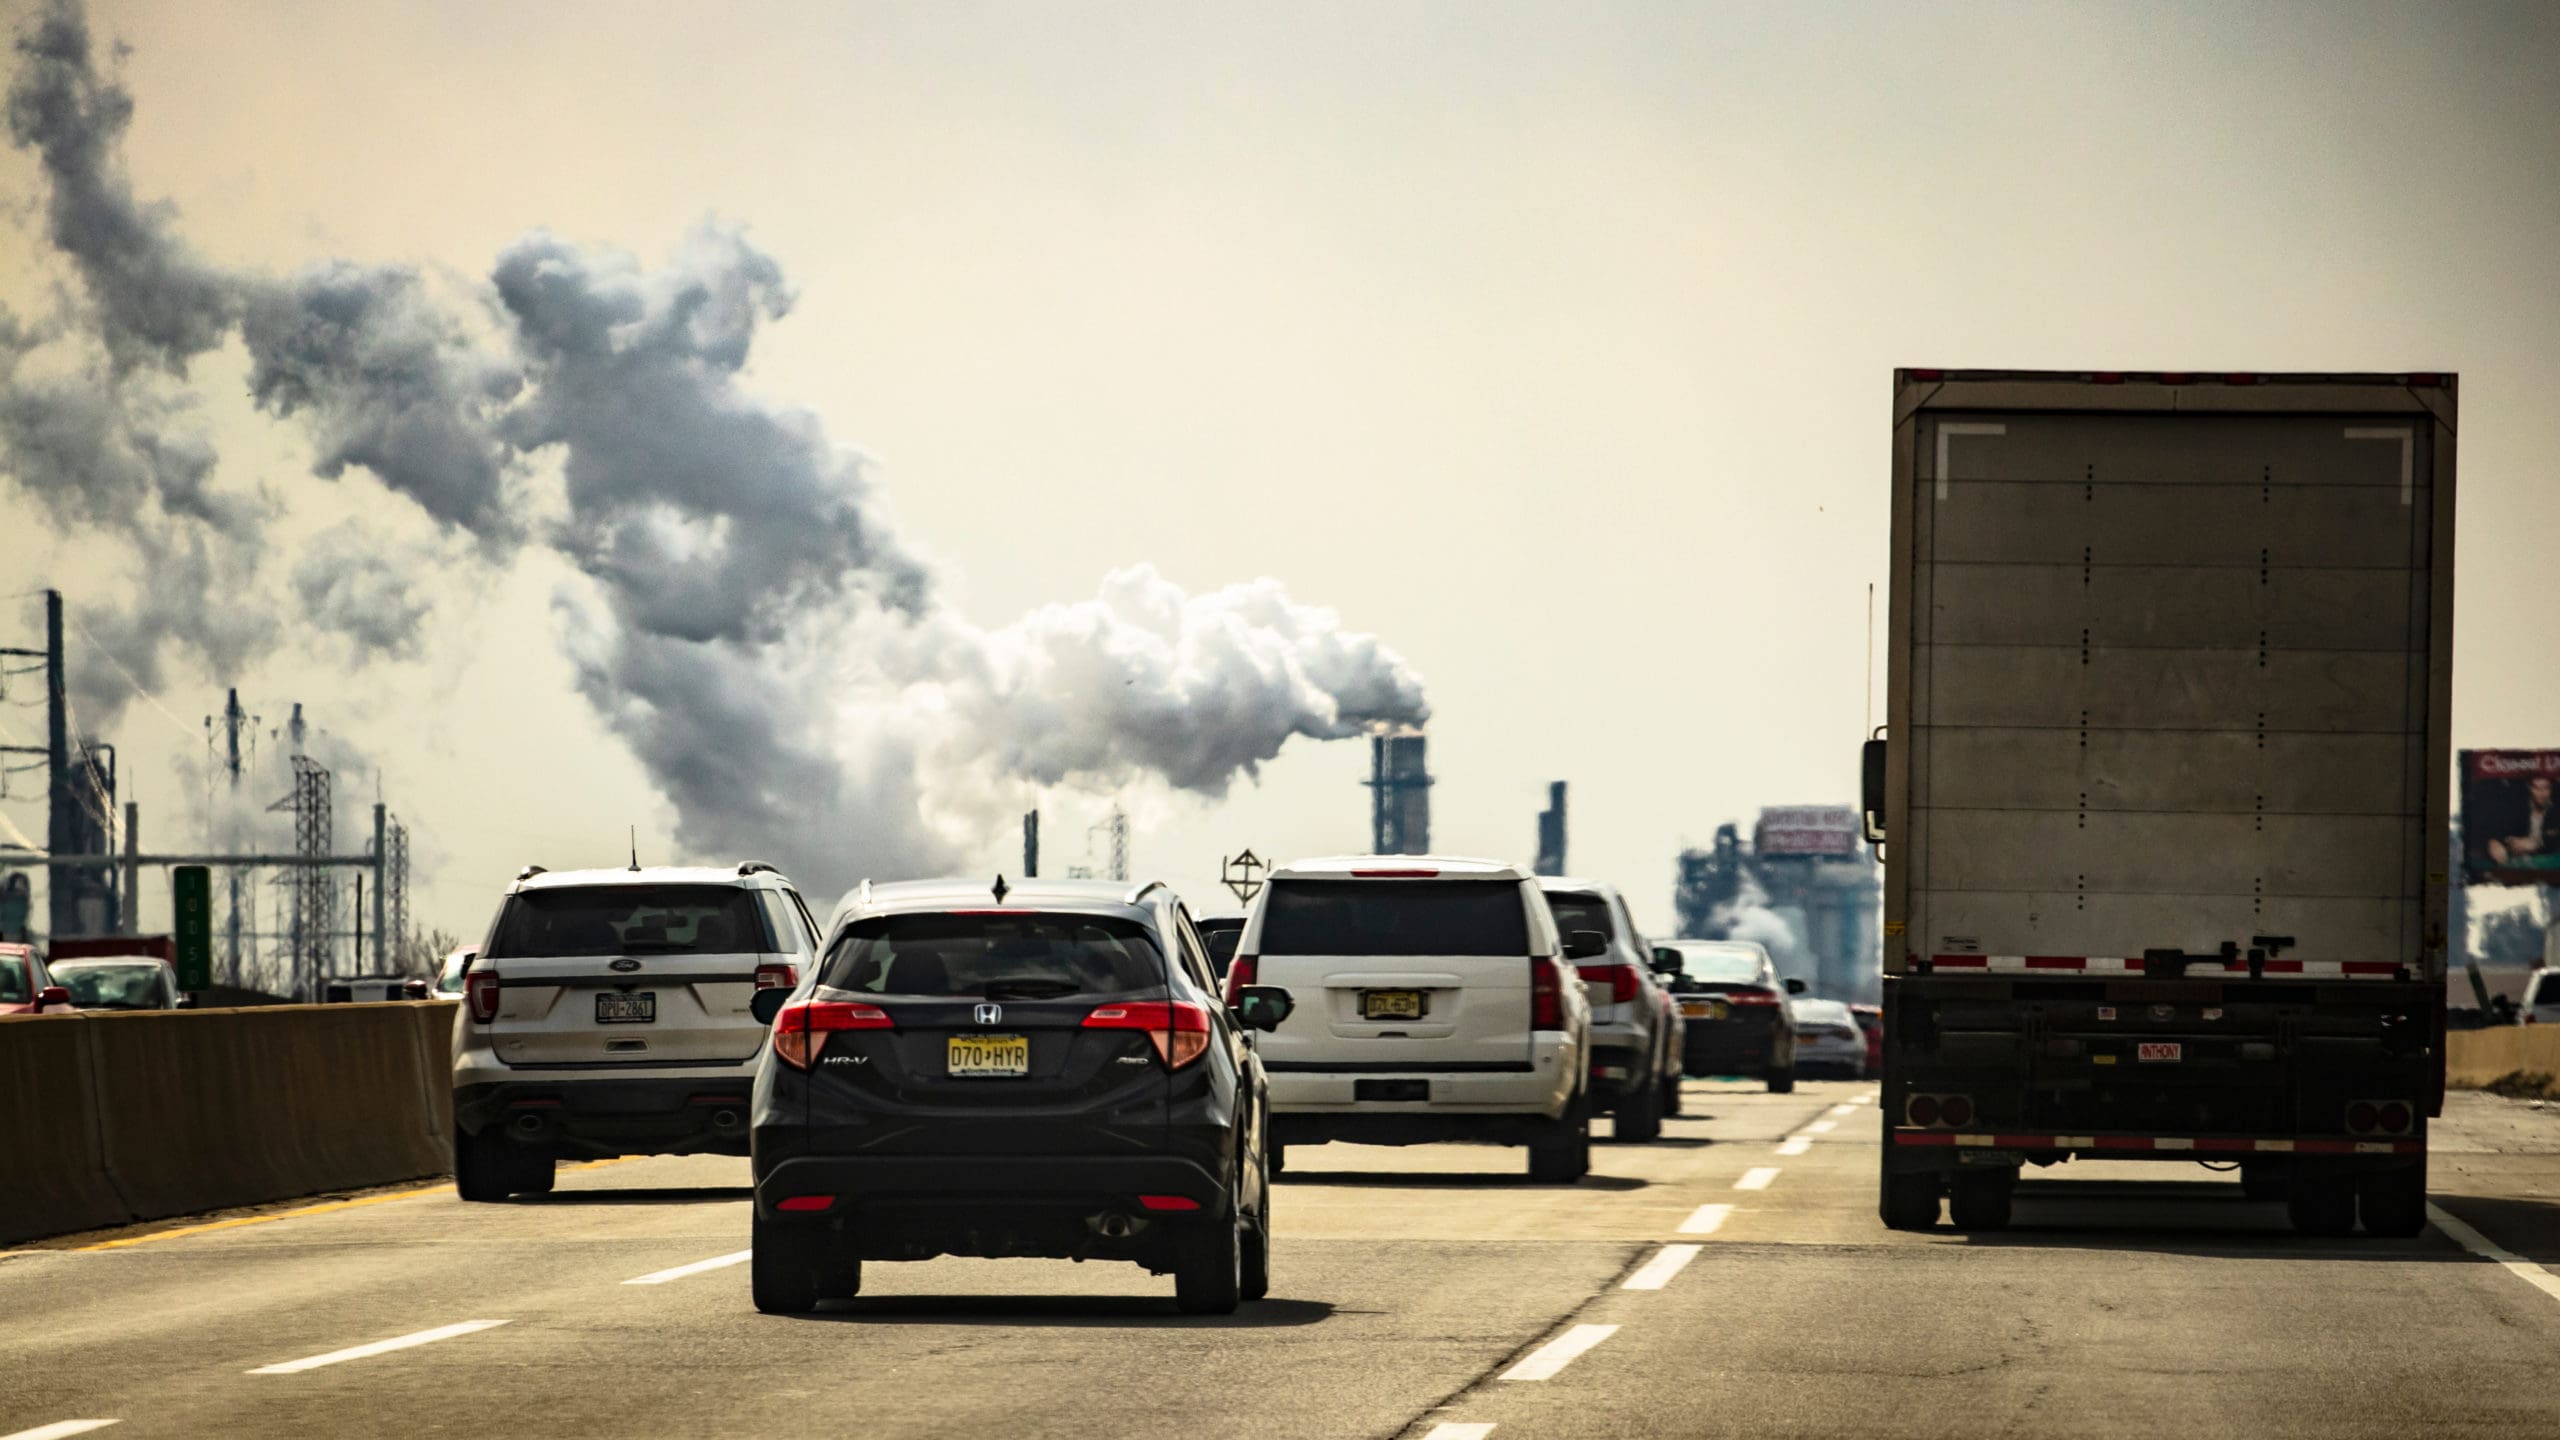 Smoggy view of cars and trucks on highway, with smoke billowing from factory in the background.